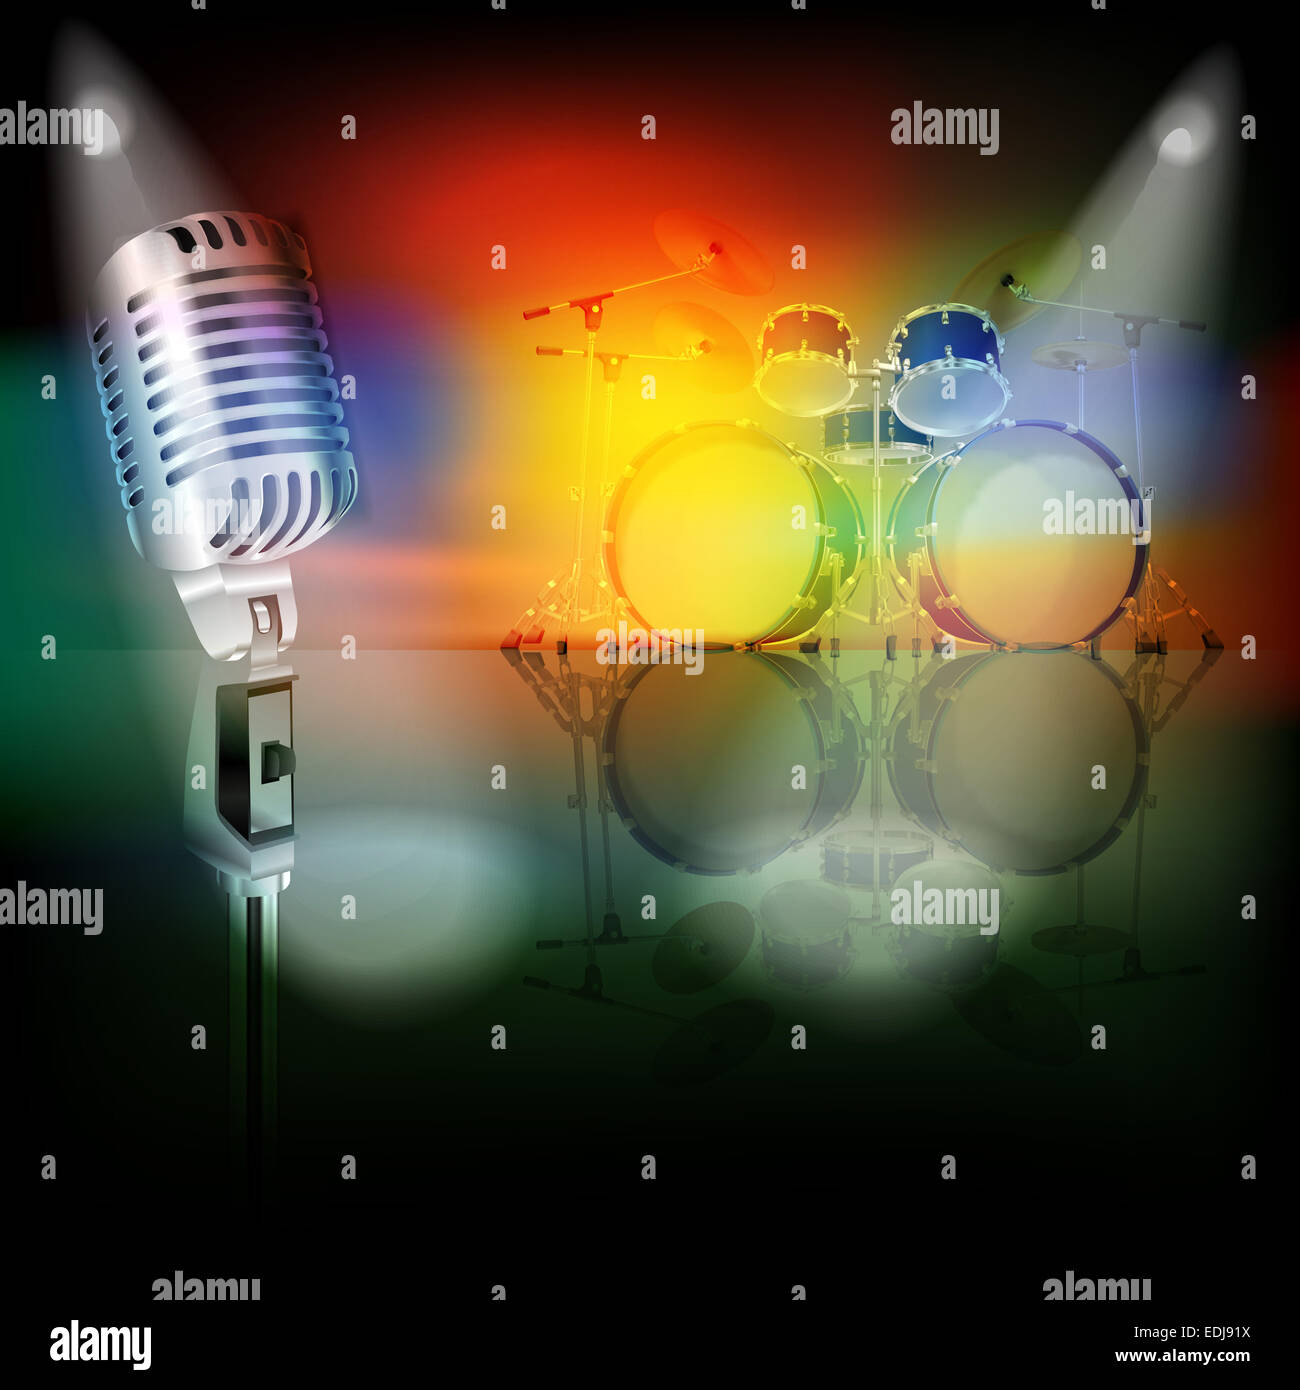 abstract background with retro microphone and drum kit on music stage Stock Photo